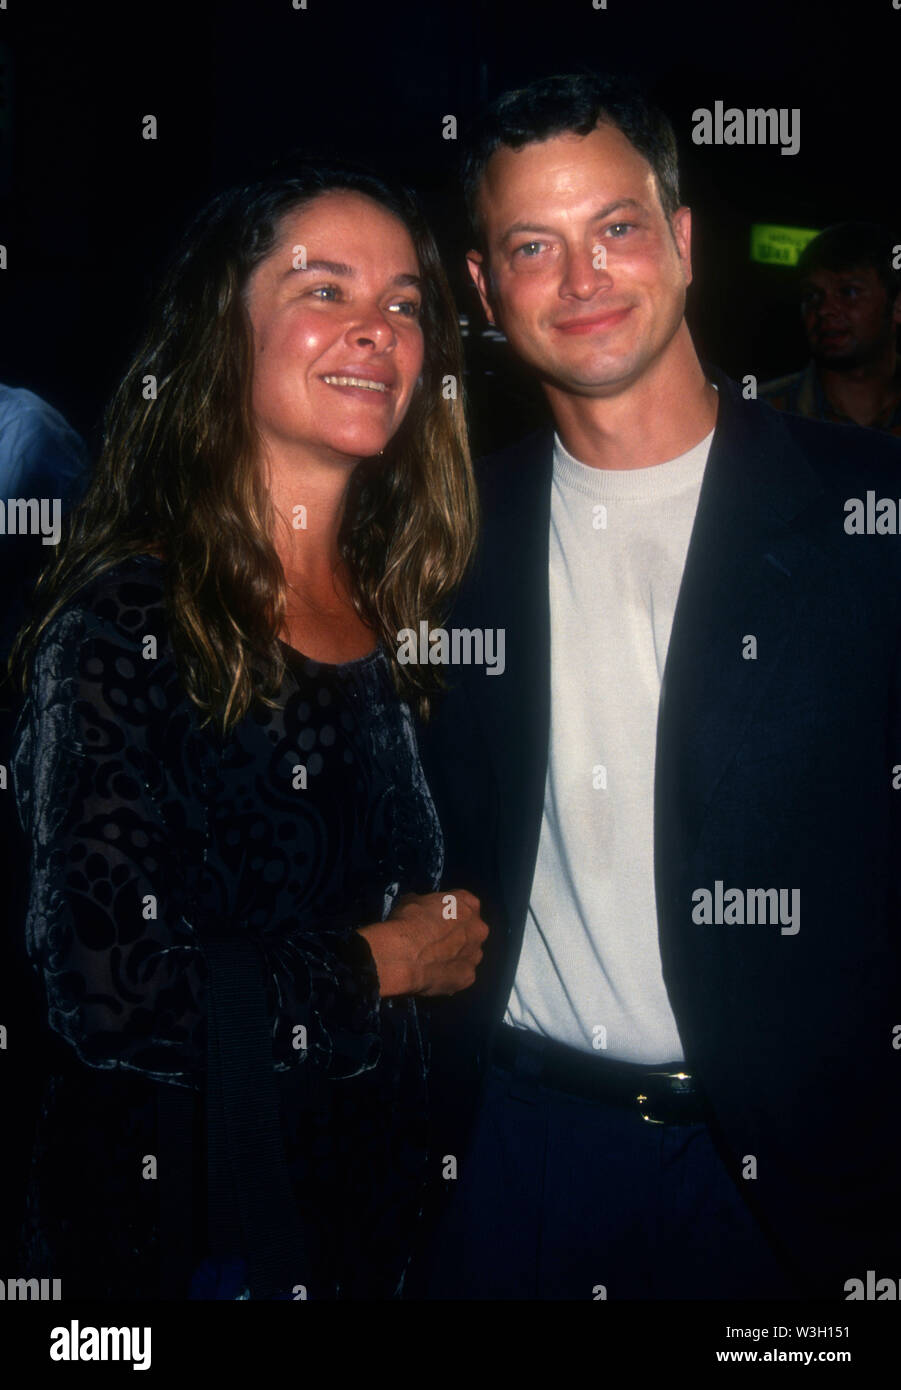 Hollywood, California, USA 25th September 1994 Actor Gary Sinise and wife Moira Harris attend Universal Pictures' 'The River Wild' Premiere on September 25, 1994 at Mann's Chinese Theatre in Hollywood, California, USA. Photo by Barry King/Alamy Stock Photo Stock Photo